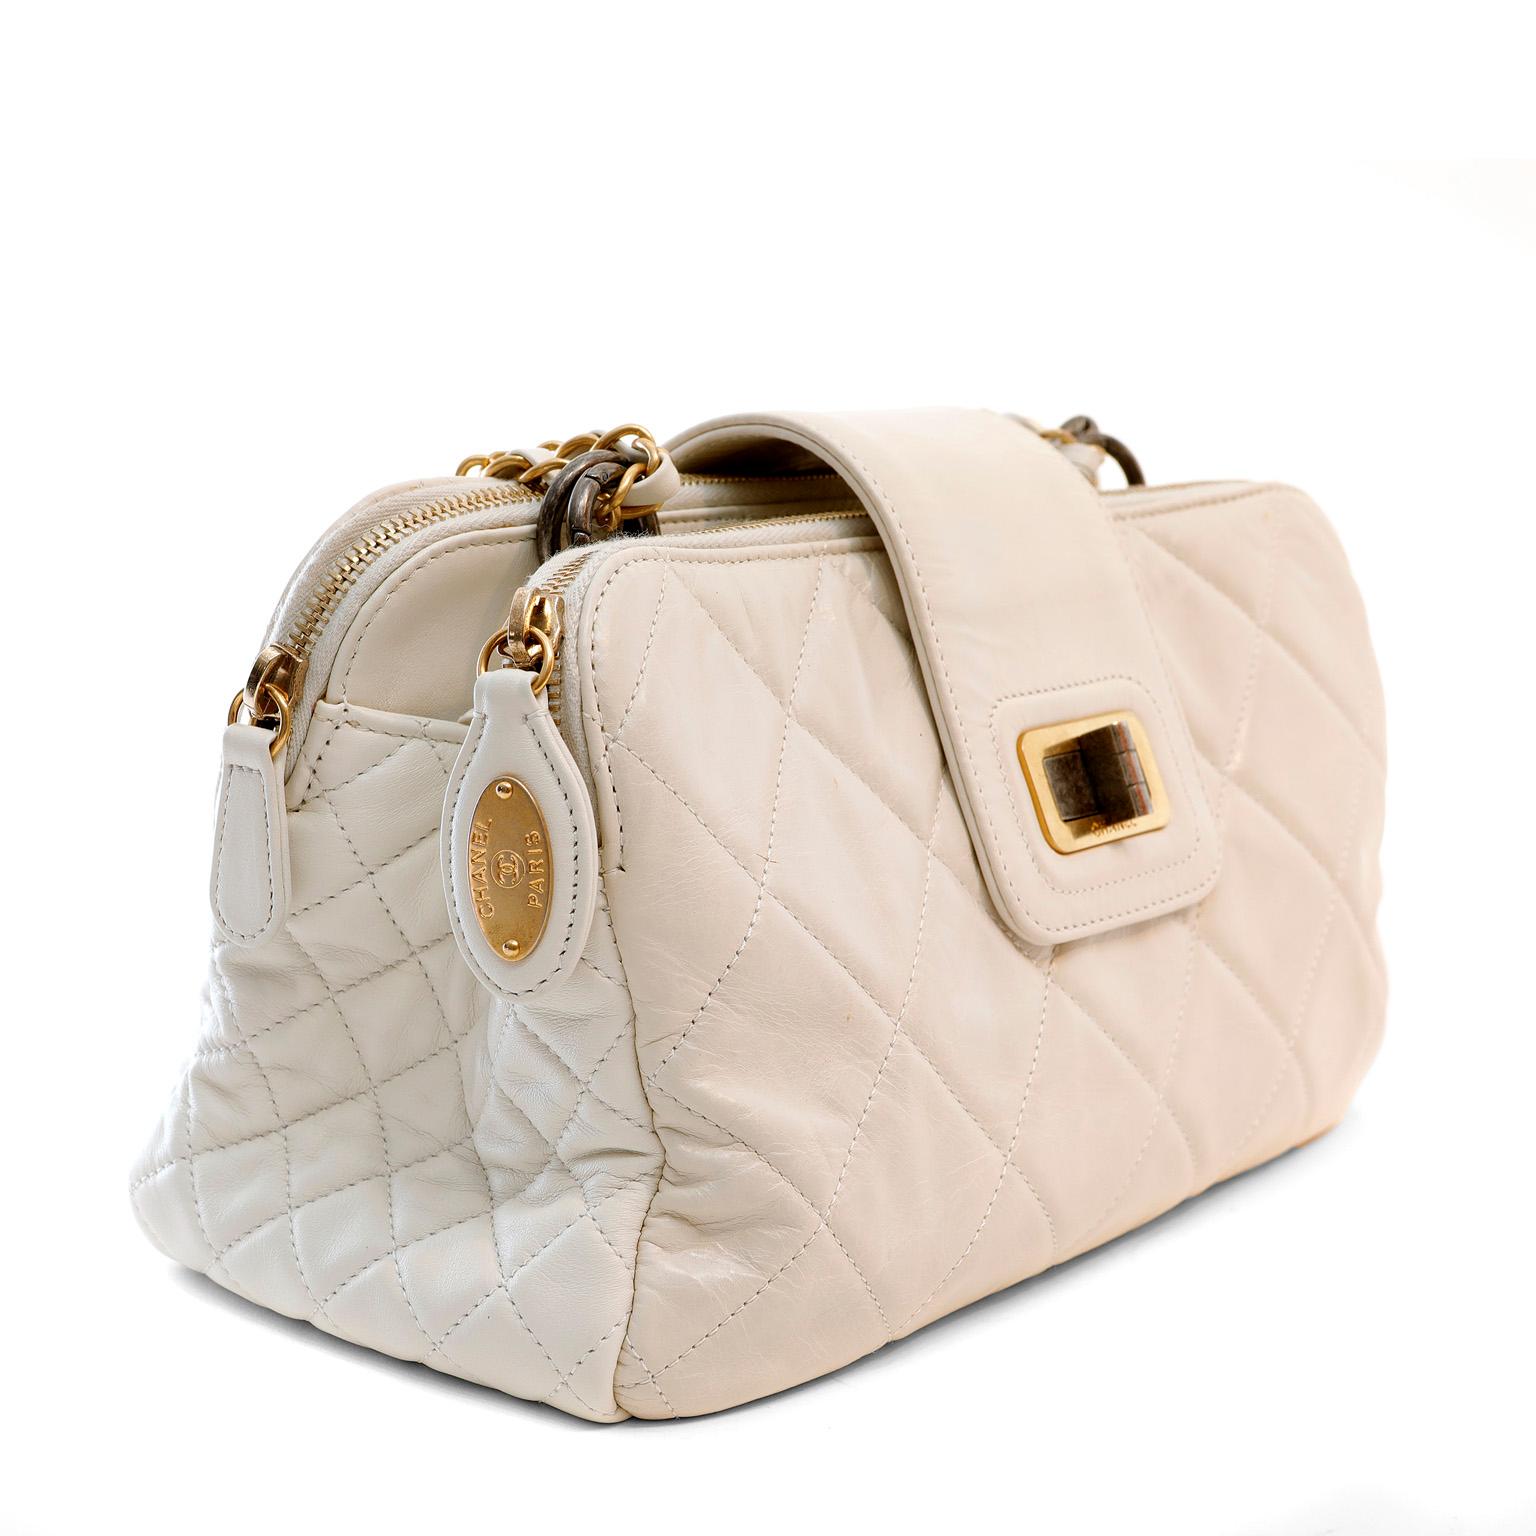 This authentic Chanel Ivory Calfskin Reissue Tote Bag is in excellent plus condition.  Neutral ivory calfskin is quilted in signature Chanel diamond pattern.  Double zippered compartments are joined together with a two-tone Mademoiselle twist lock